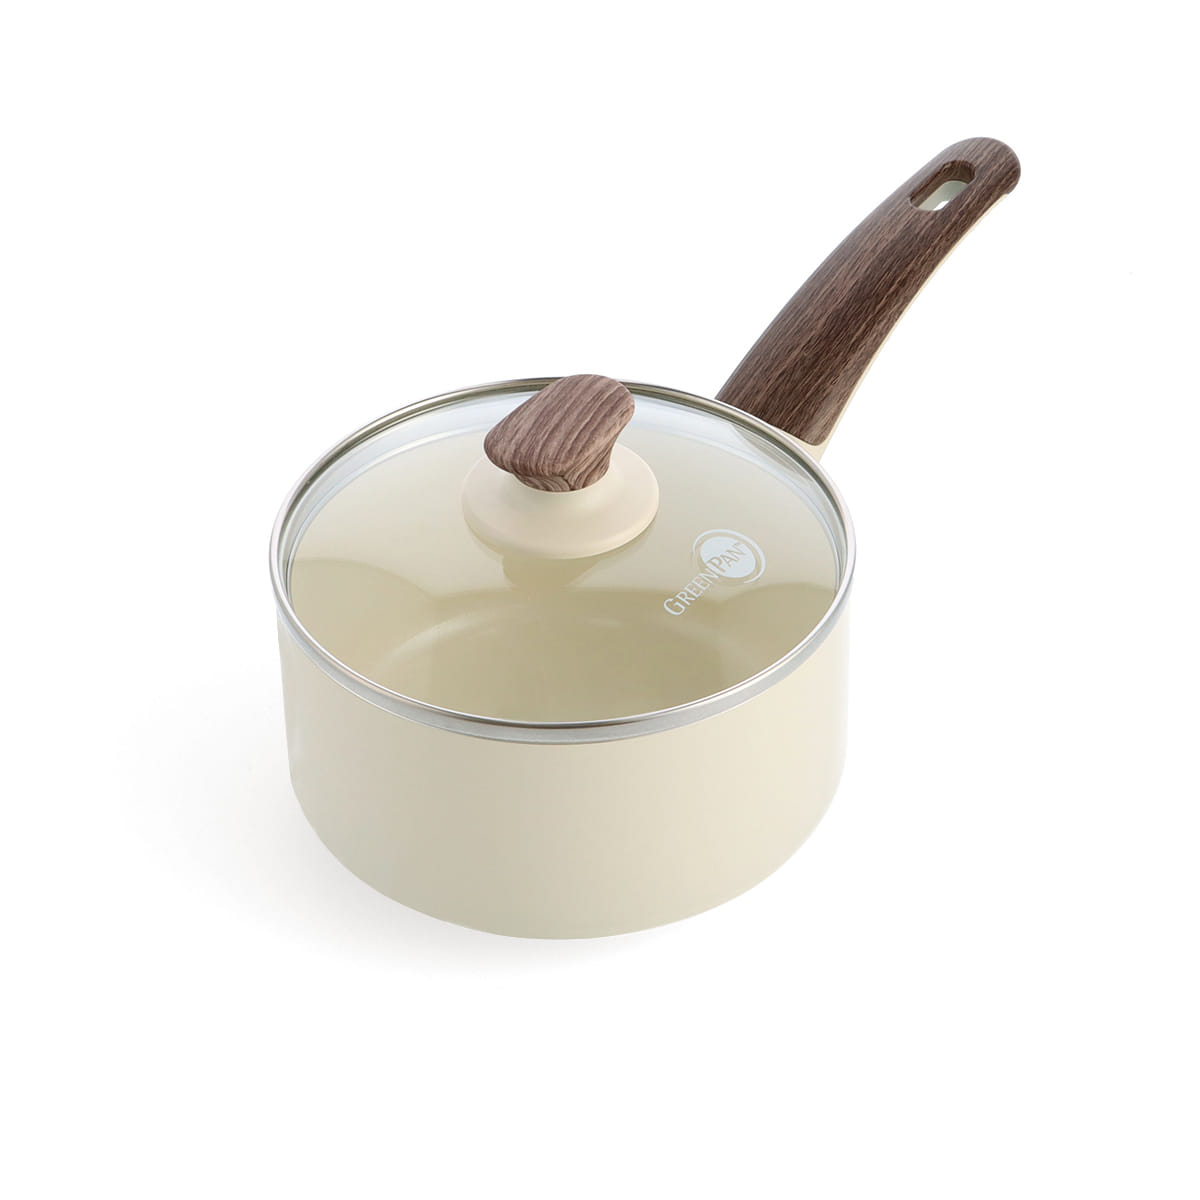 Wood-Be<br> Saucepan with Lid, Cream White - 16cm